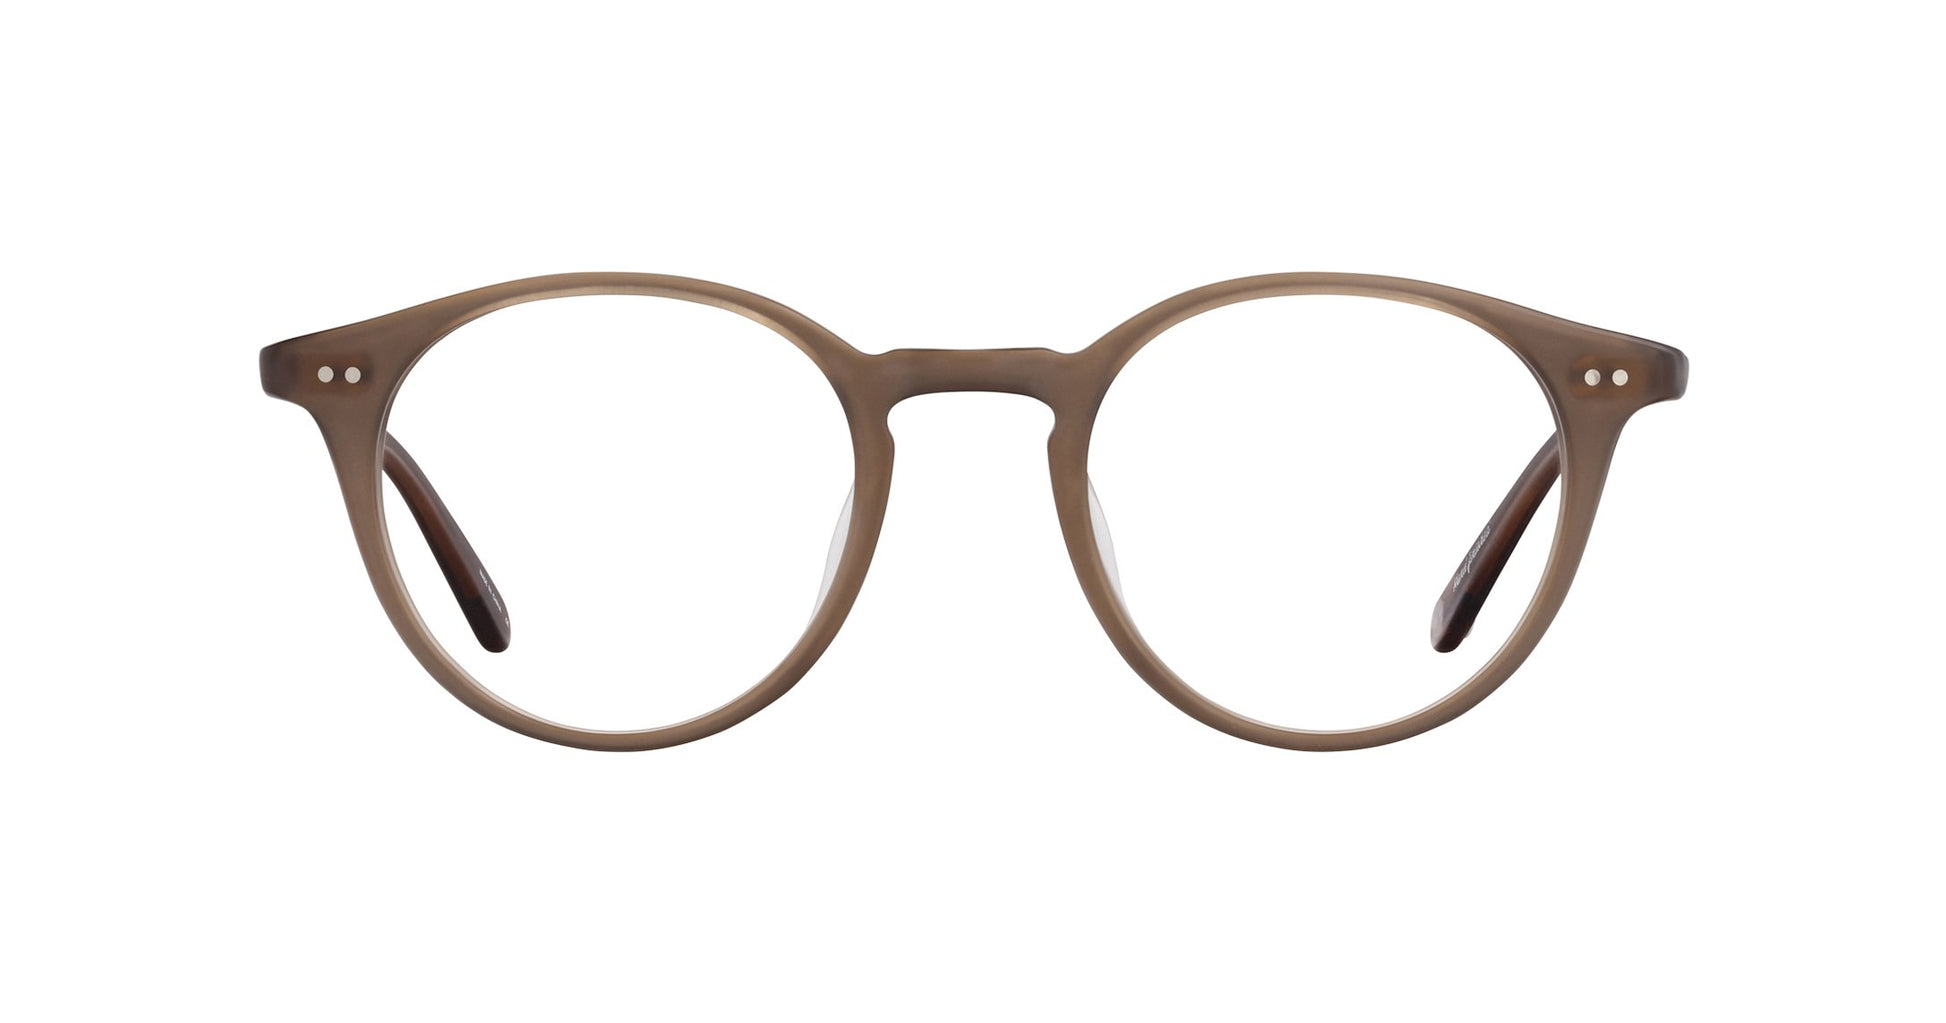 Inspired by the mid-century, Clune Matte Espresso is a modern take on the classic P3 eyeglass silhouette, with a distinctive round shape and lightweight acetate construction. Hand Finished in LA. Now Available in Toronto, Canada.